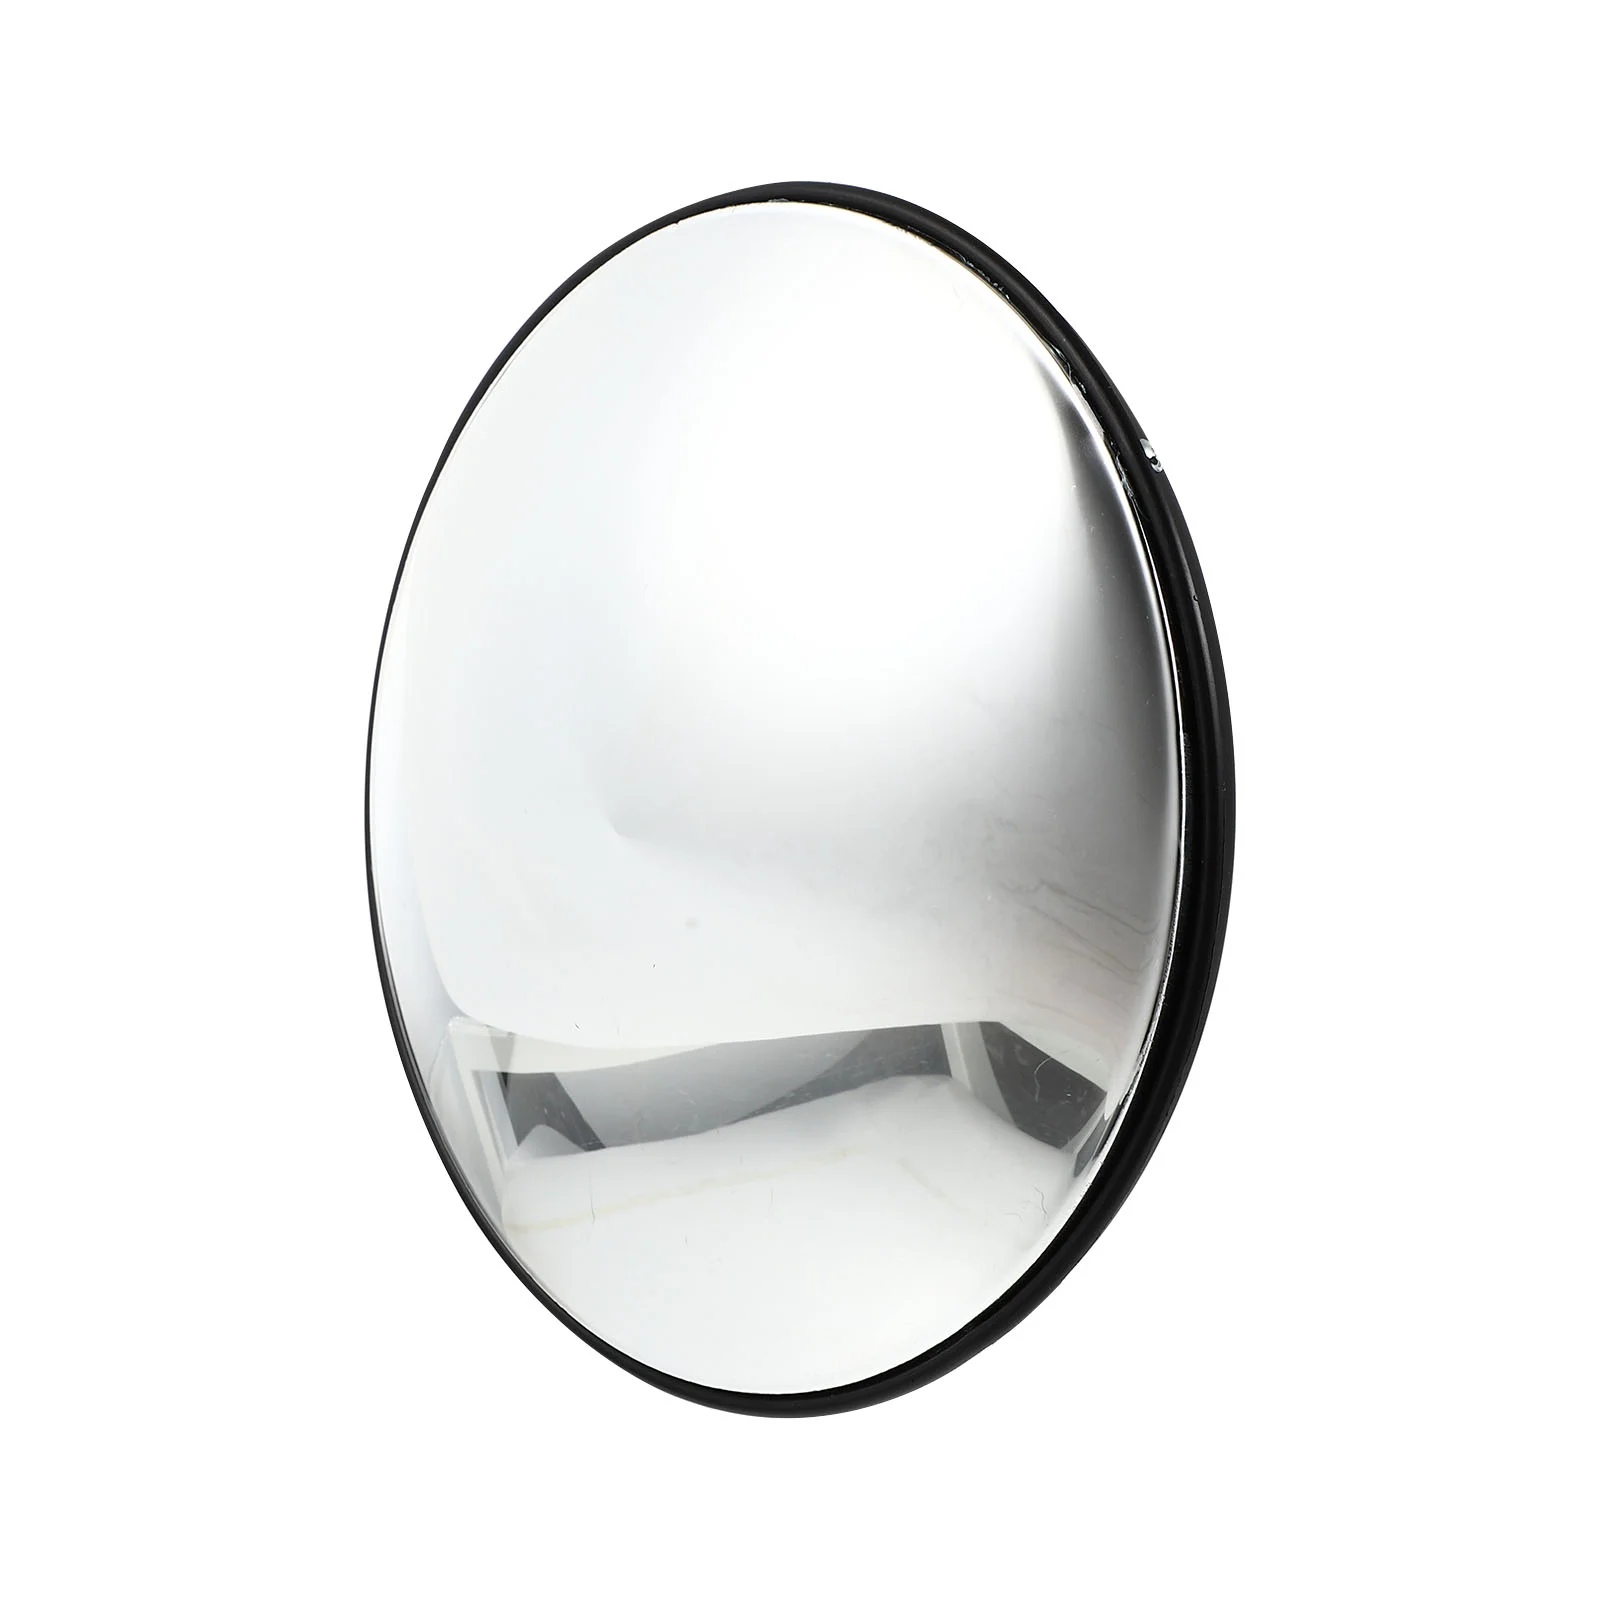 

Mirror Safety Traffic Convex Outdoor Driveway Road Curved Mirrors Driveways Wide Angle Round Junction Blind Spot For Spherical